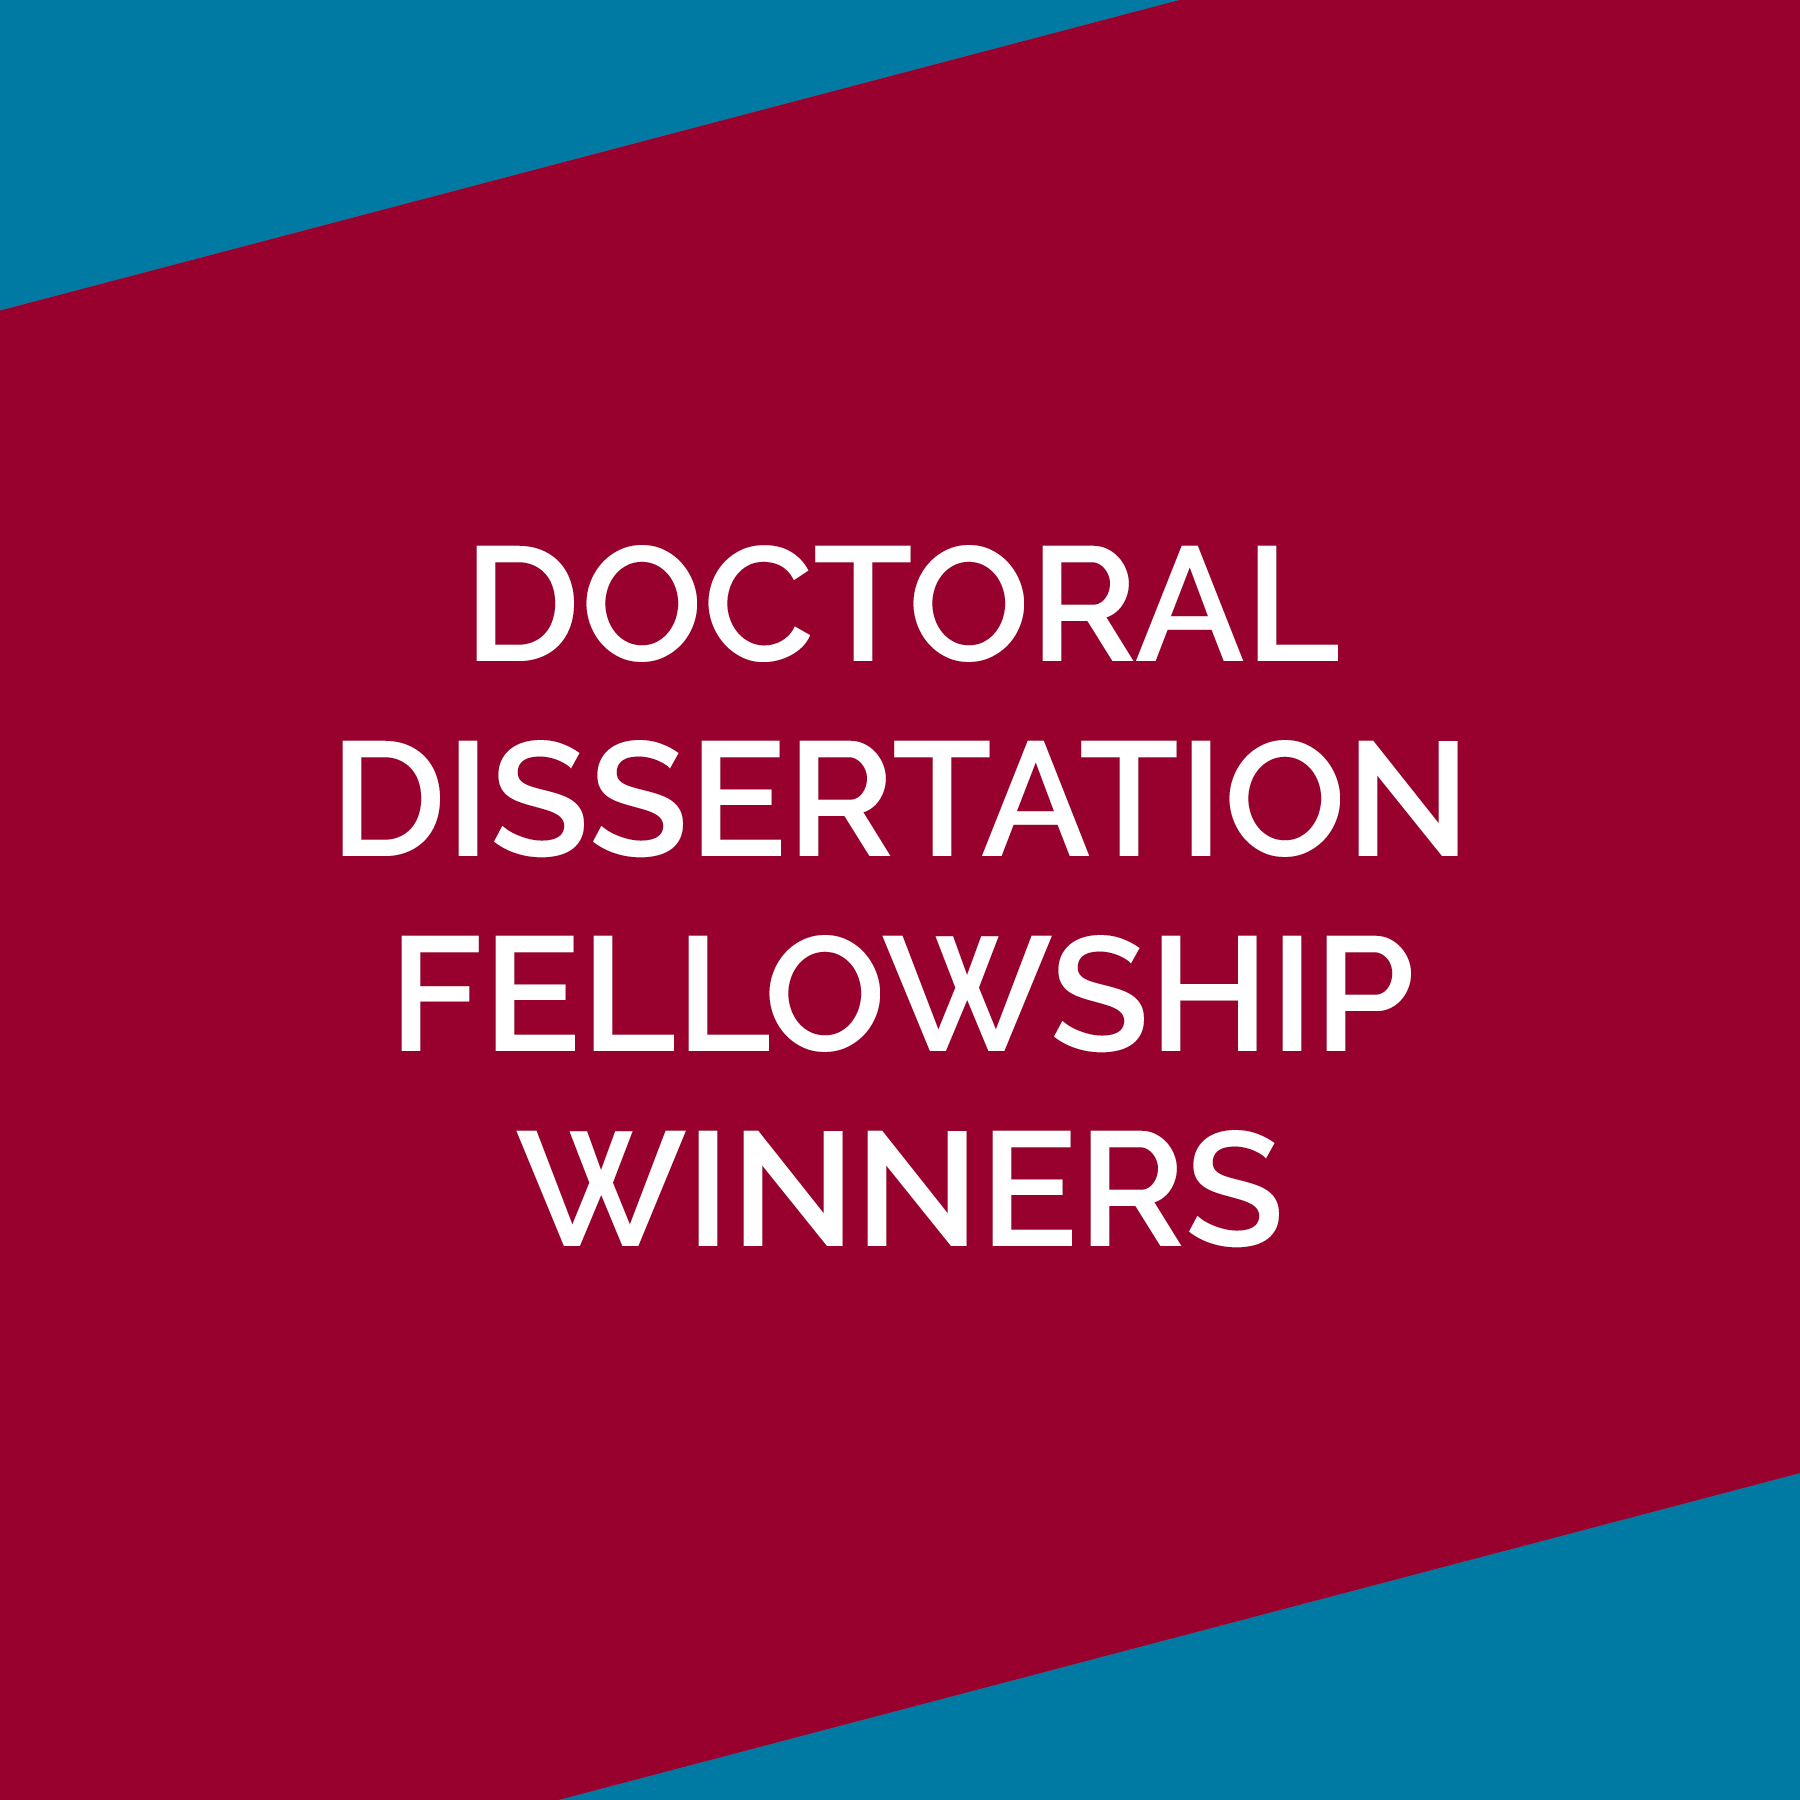 Doctoral Dissertation Fellowship Winners graphic